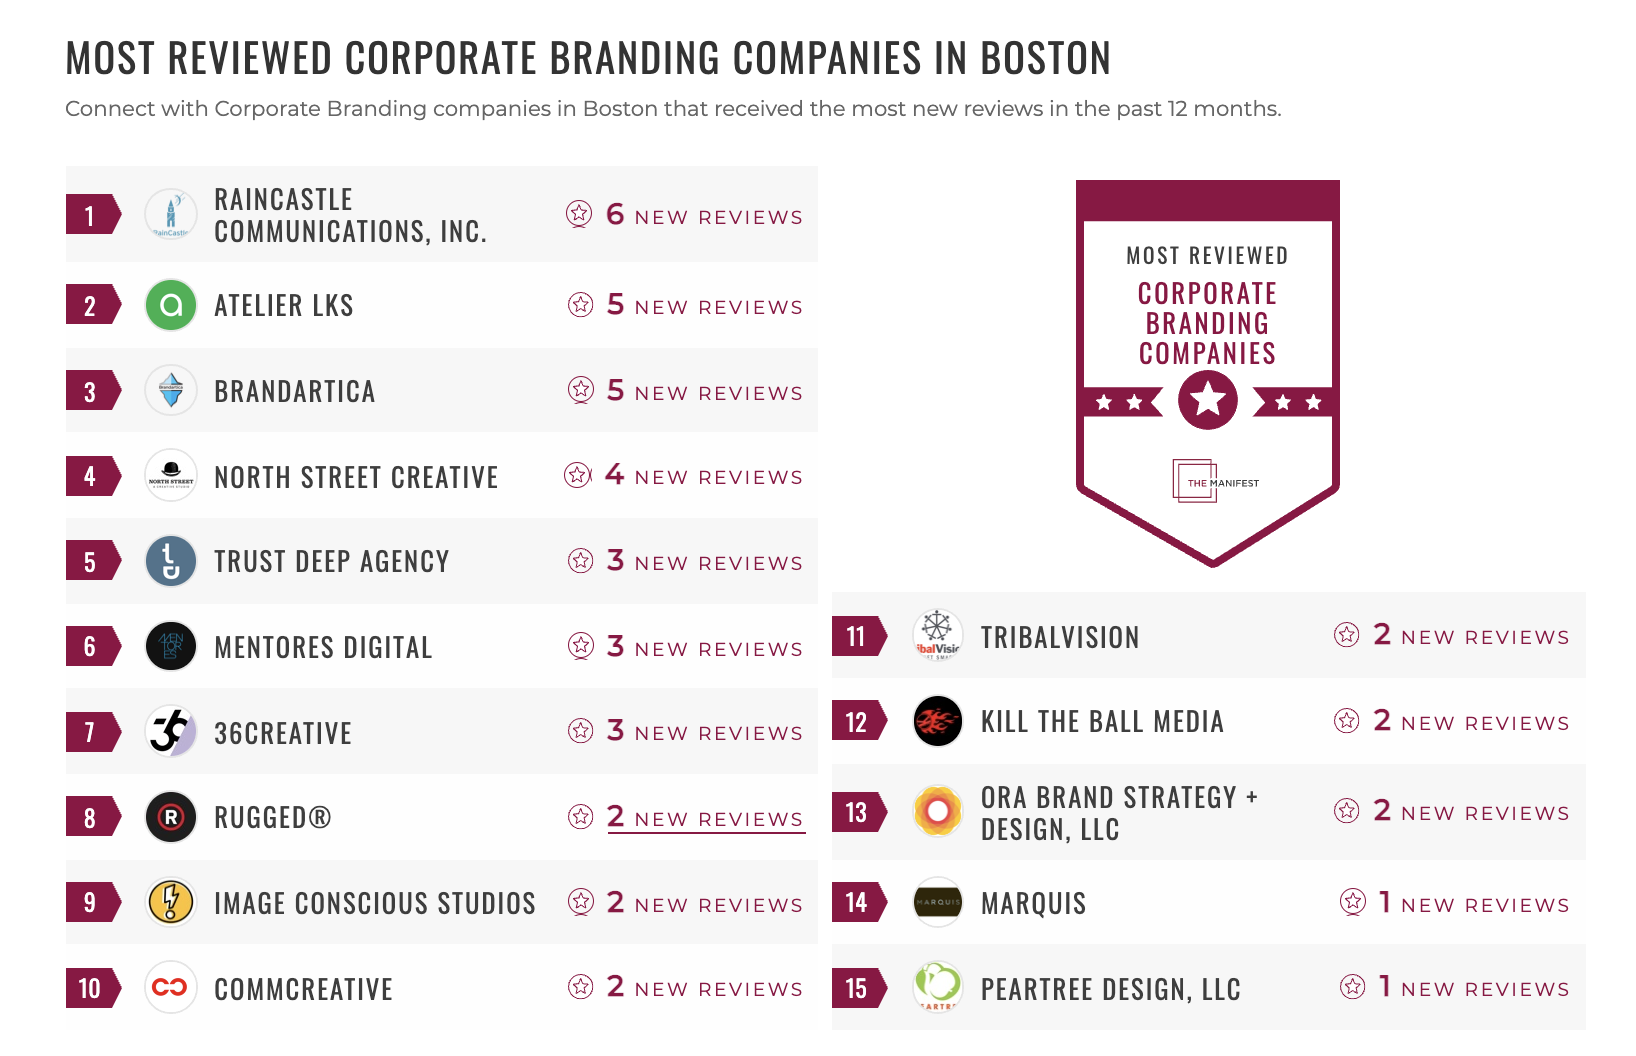 Most Reviewed Corporate Branding in Boston